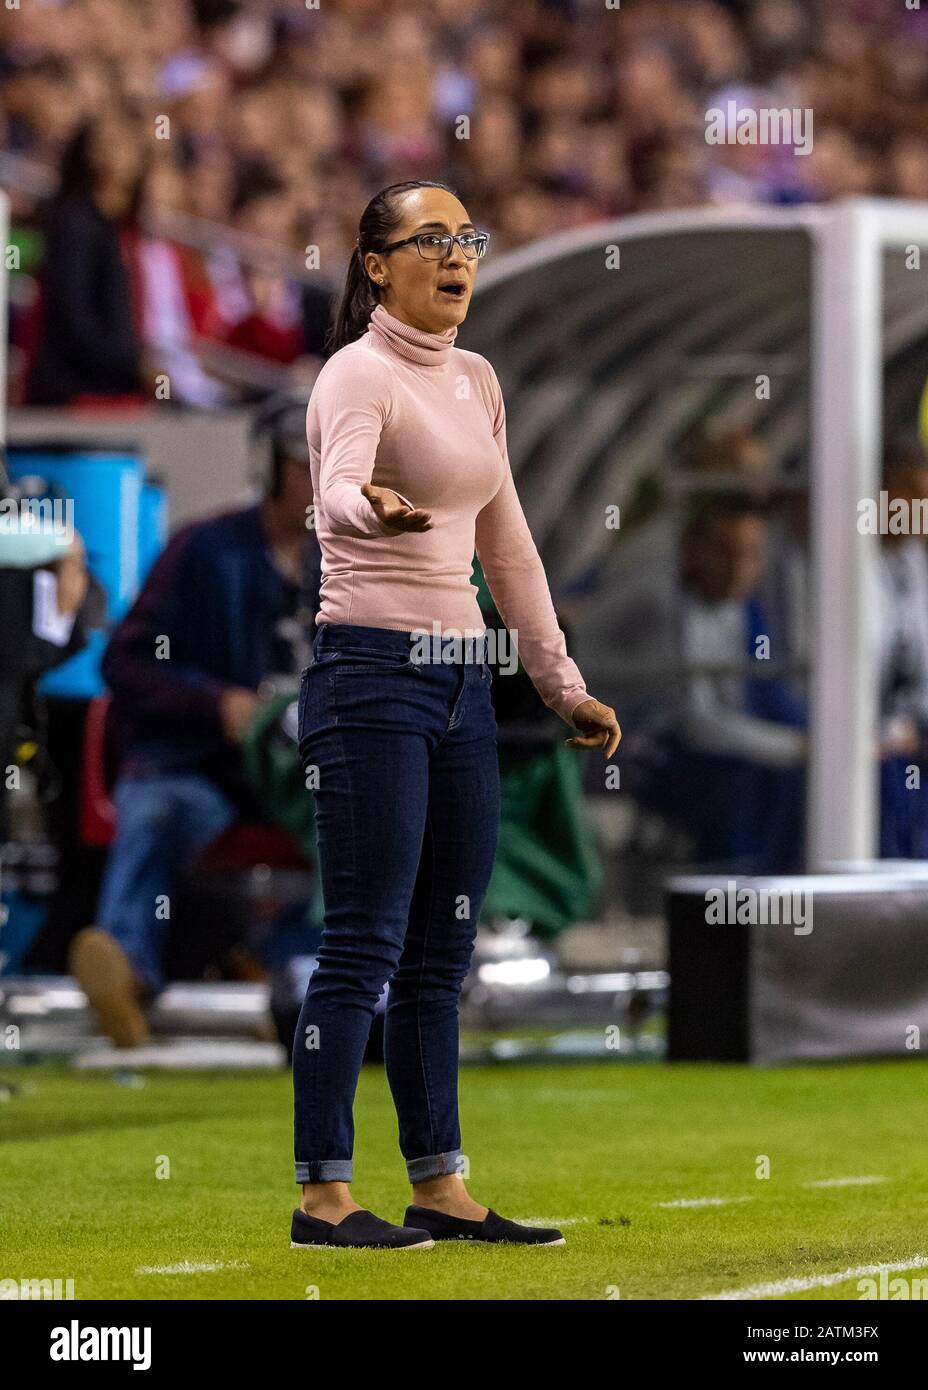 Houston, Texas, USA. 03rd Feb, 2020. Costa Rica Women's Olympic head coach Amelia  Valverde reacts on the sideline in the first half during the CONCACAF Group  A Women's Olympic Qualifying match against